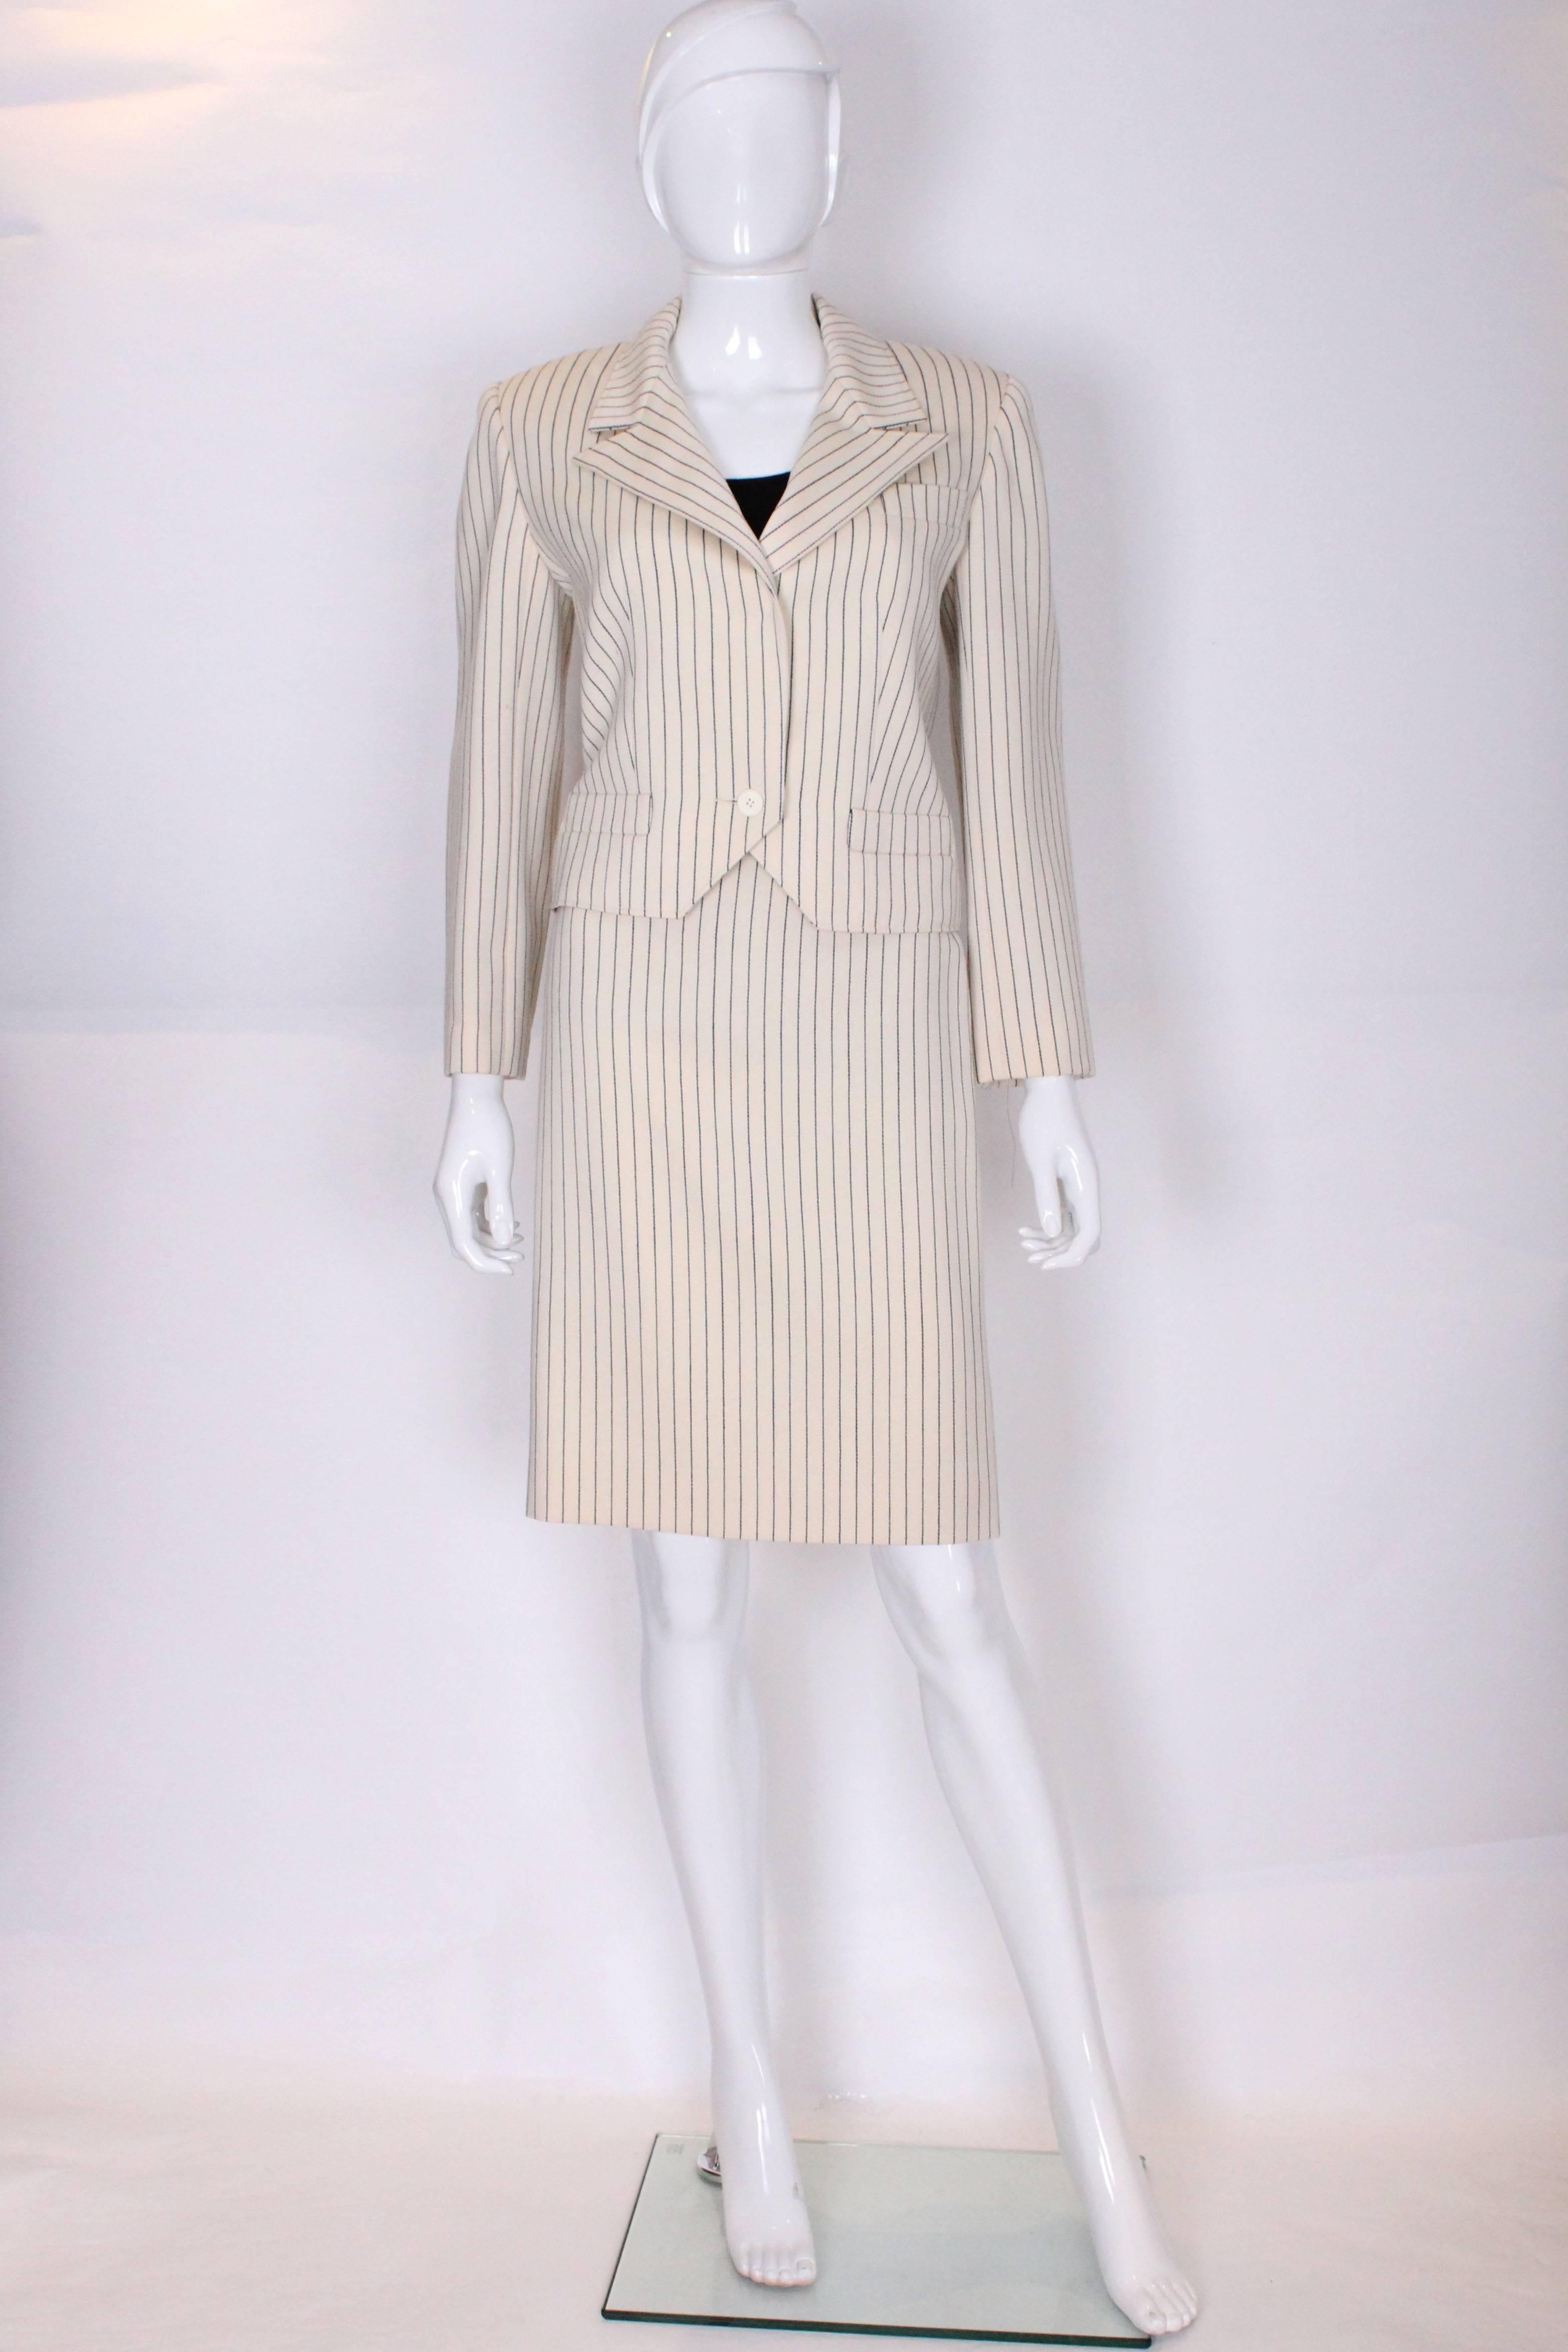 A chic skirt suit by Christian Dior, in a cream wool with a black stripe.
The jacket is tuxedo style with a cut away front, with two pockets at waist leval and one on the left breast pocket. The jacket fastens with one button.
The skirt has a